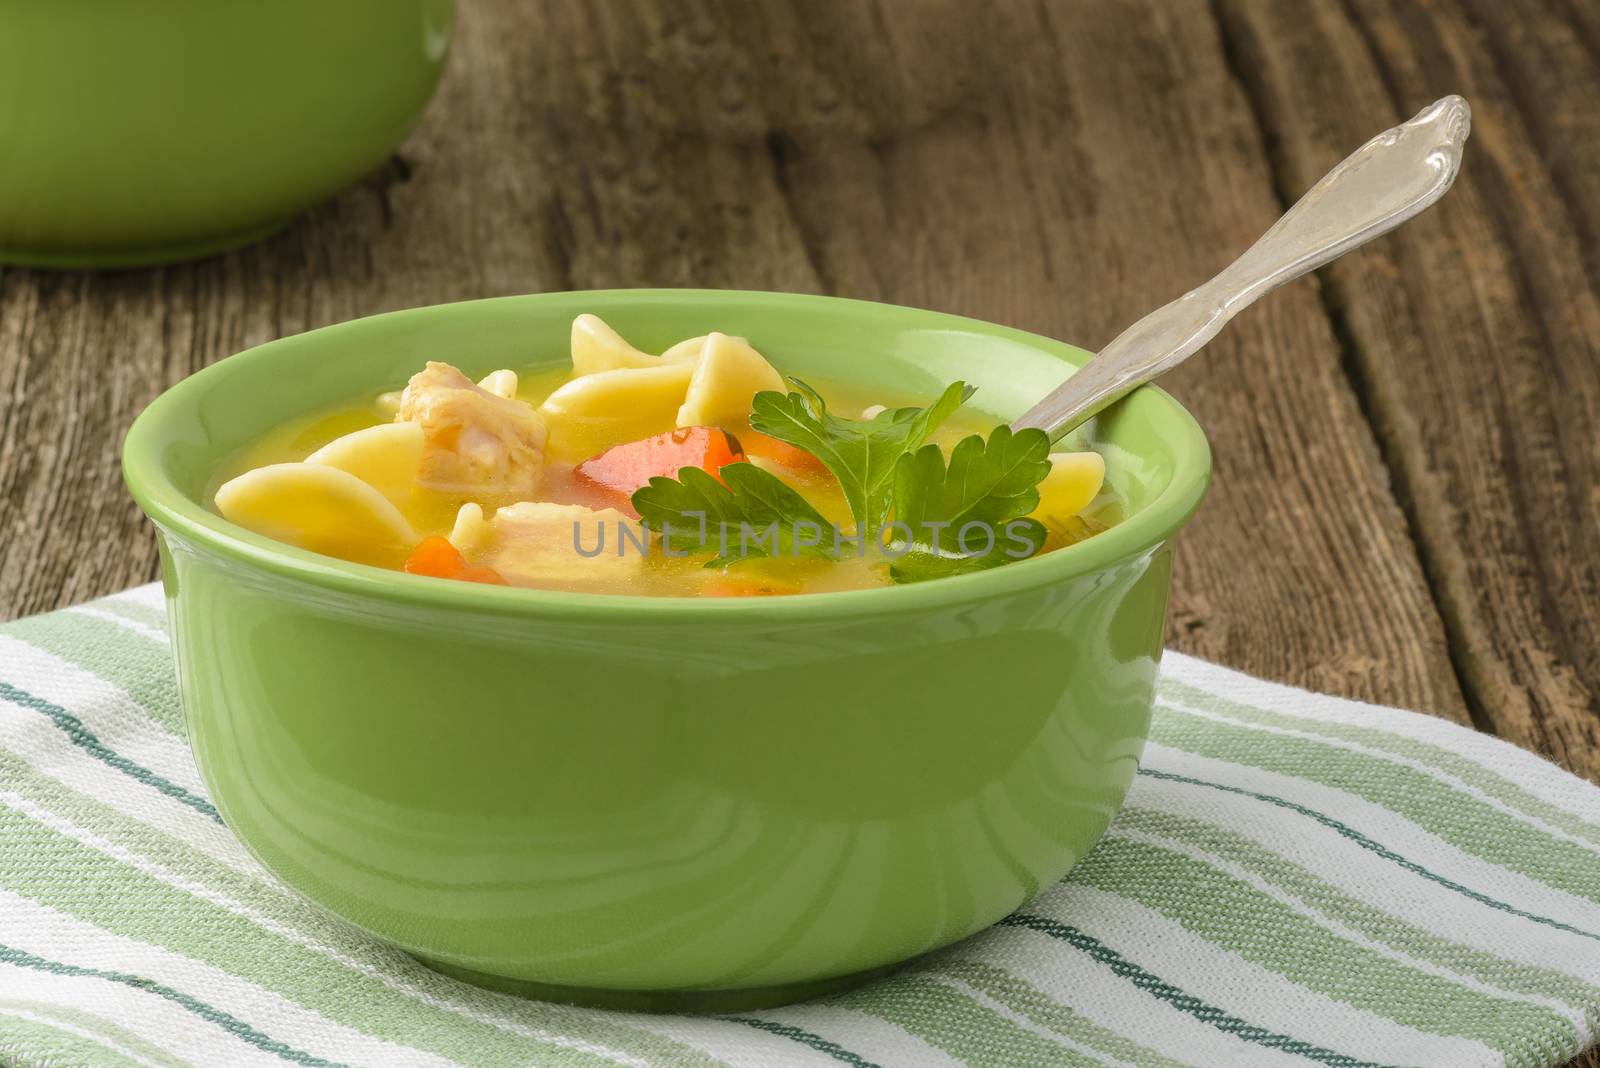 Homemade Chicken Noodle Soup by billberryphotography